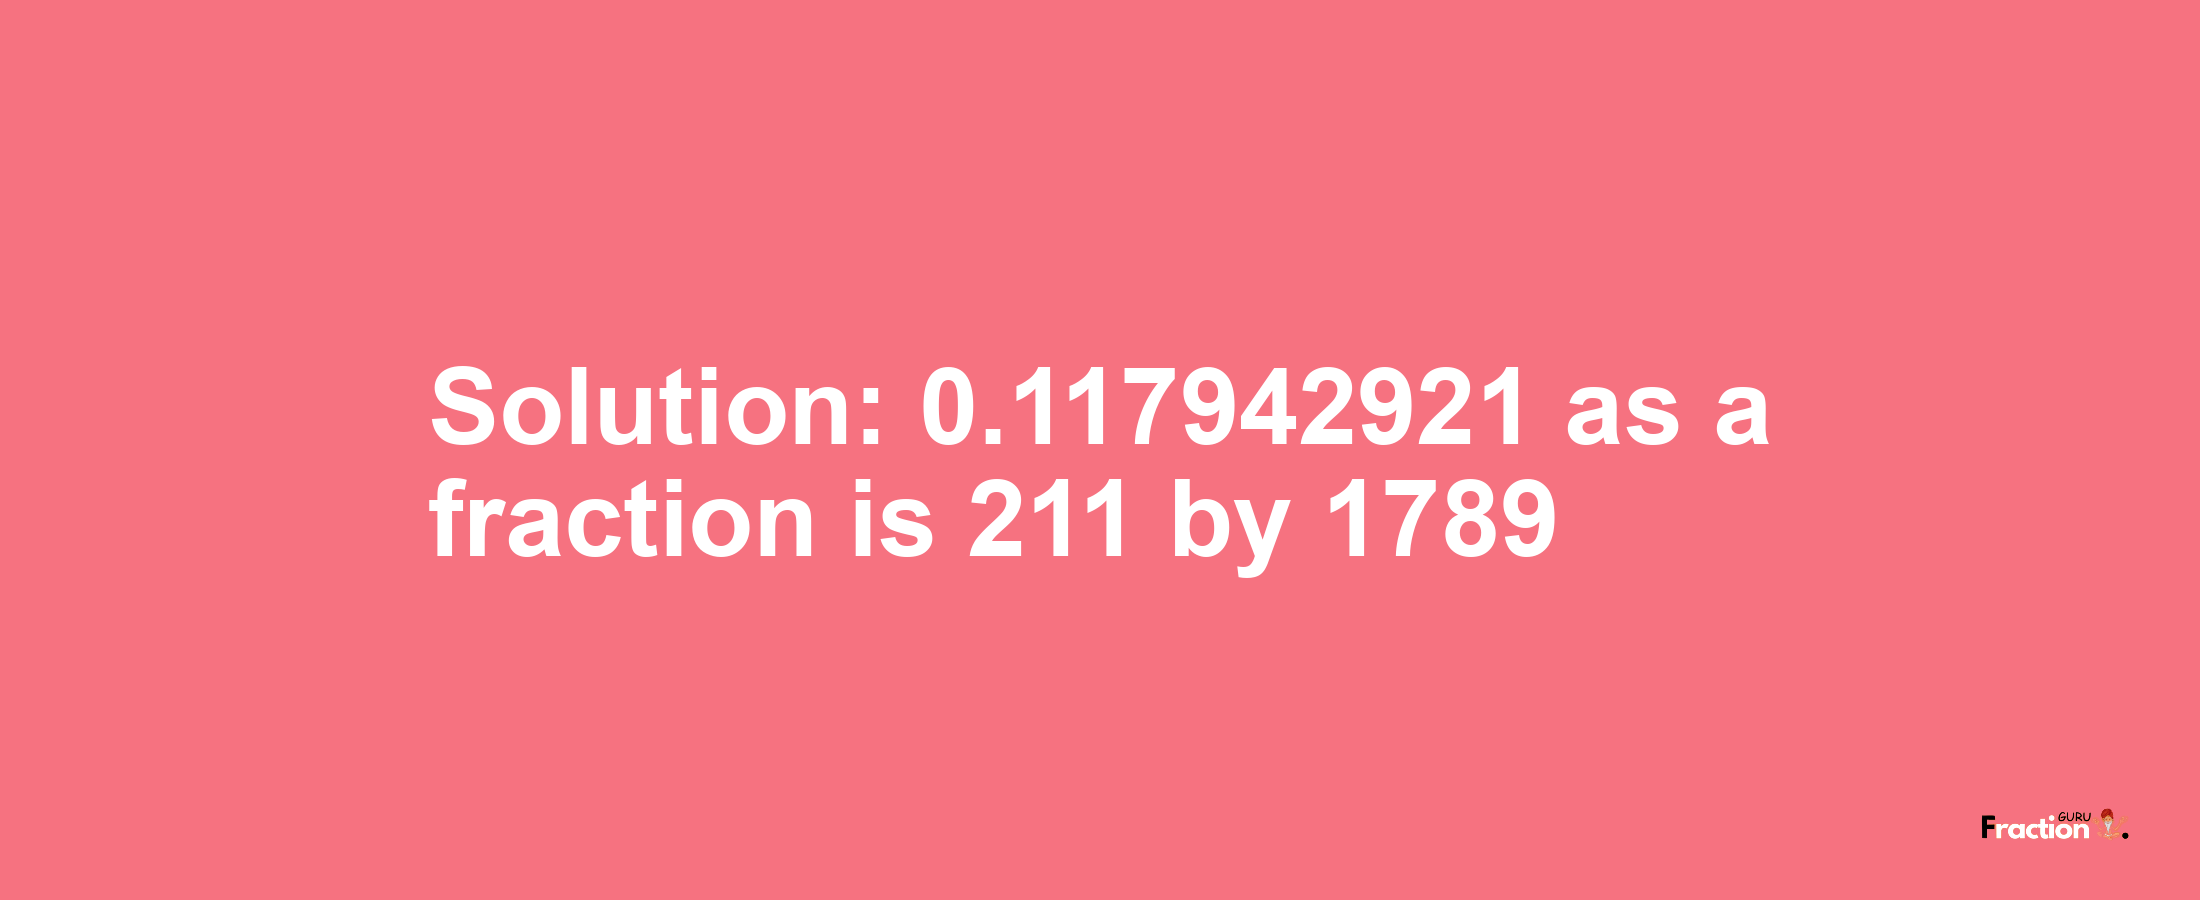 Solution:0.117942921 as a fraction is 211/1789